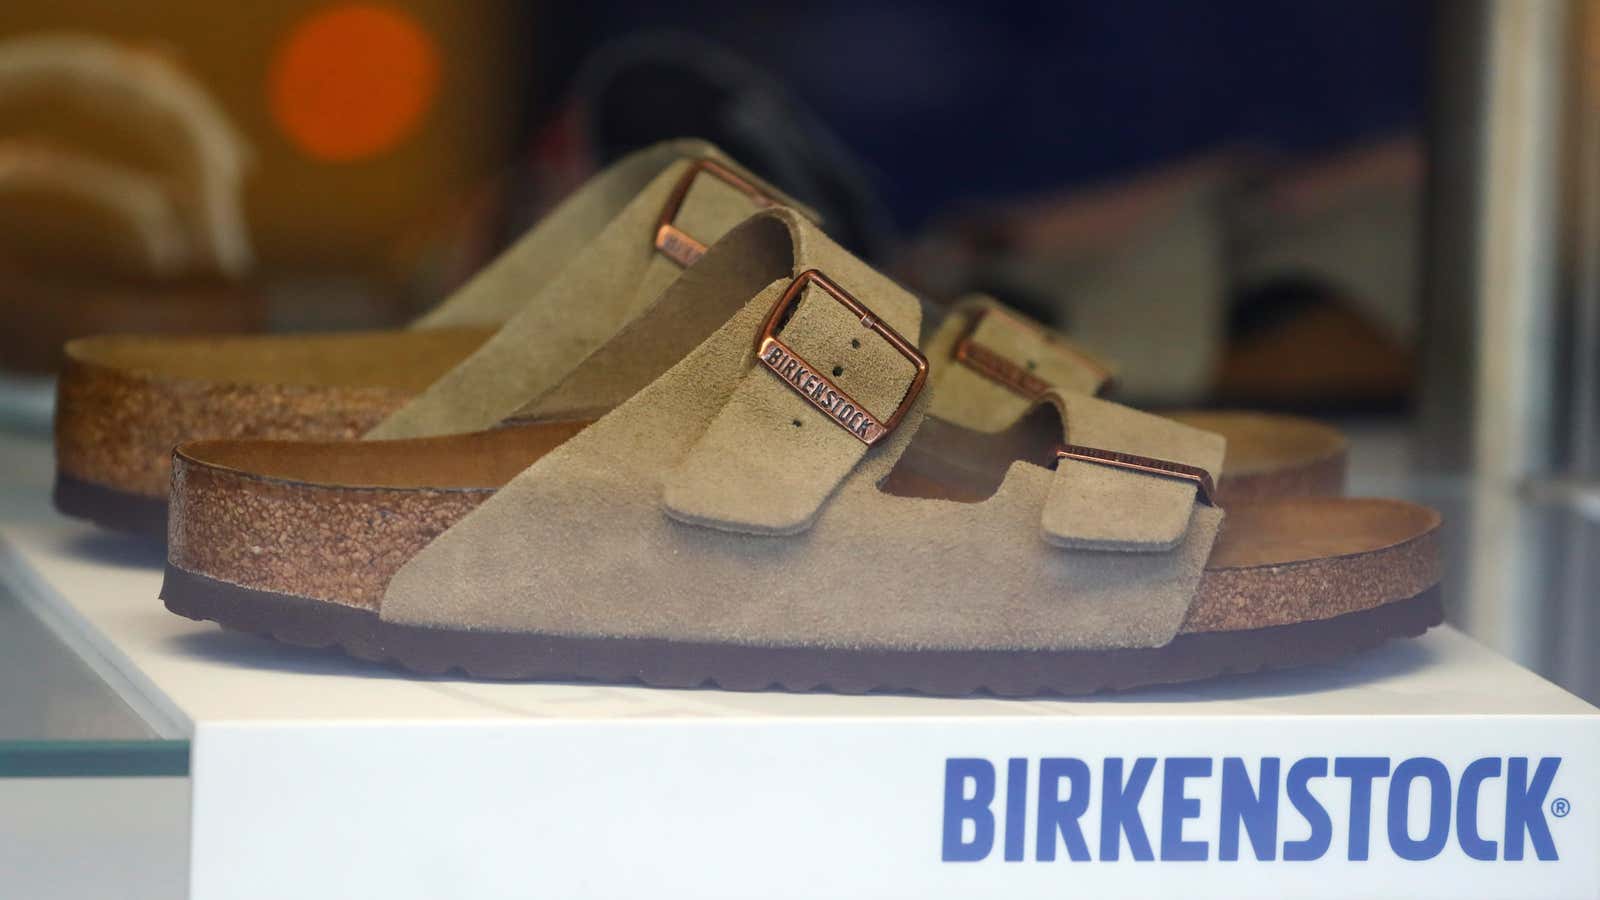 Birkenstock has a new owner, a private equity firm in which luxury giant LVMH is a partner.